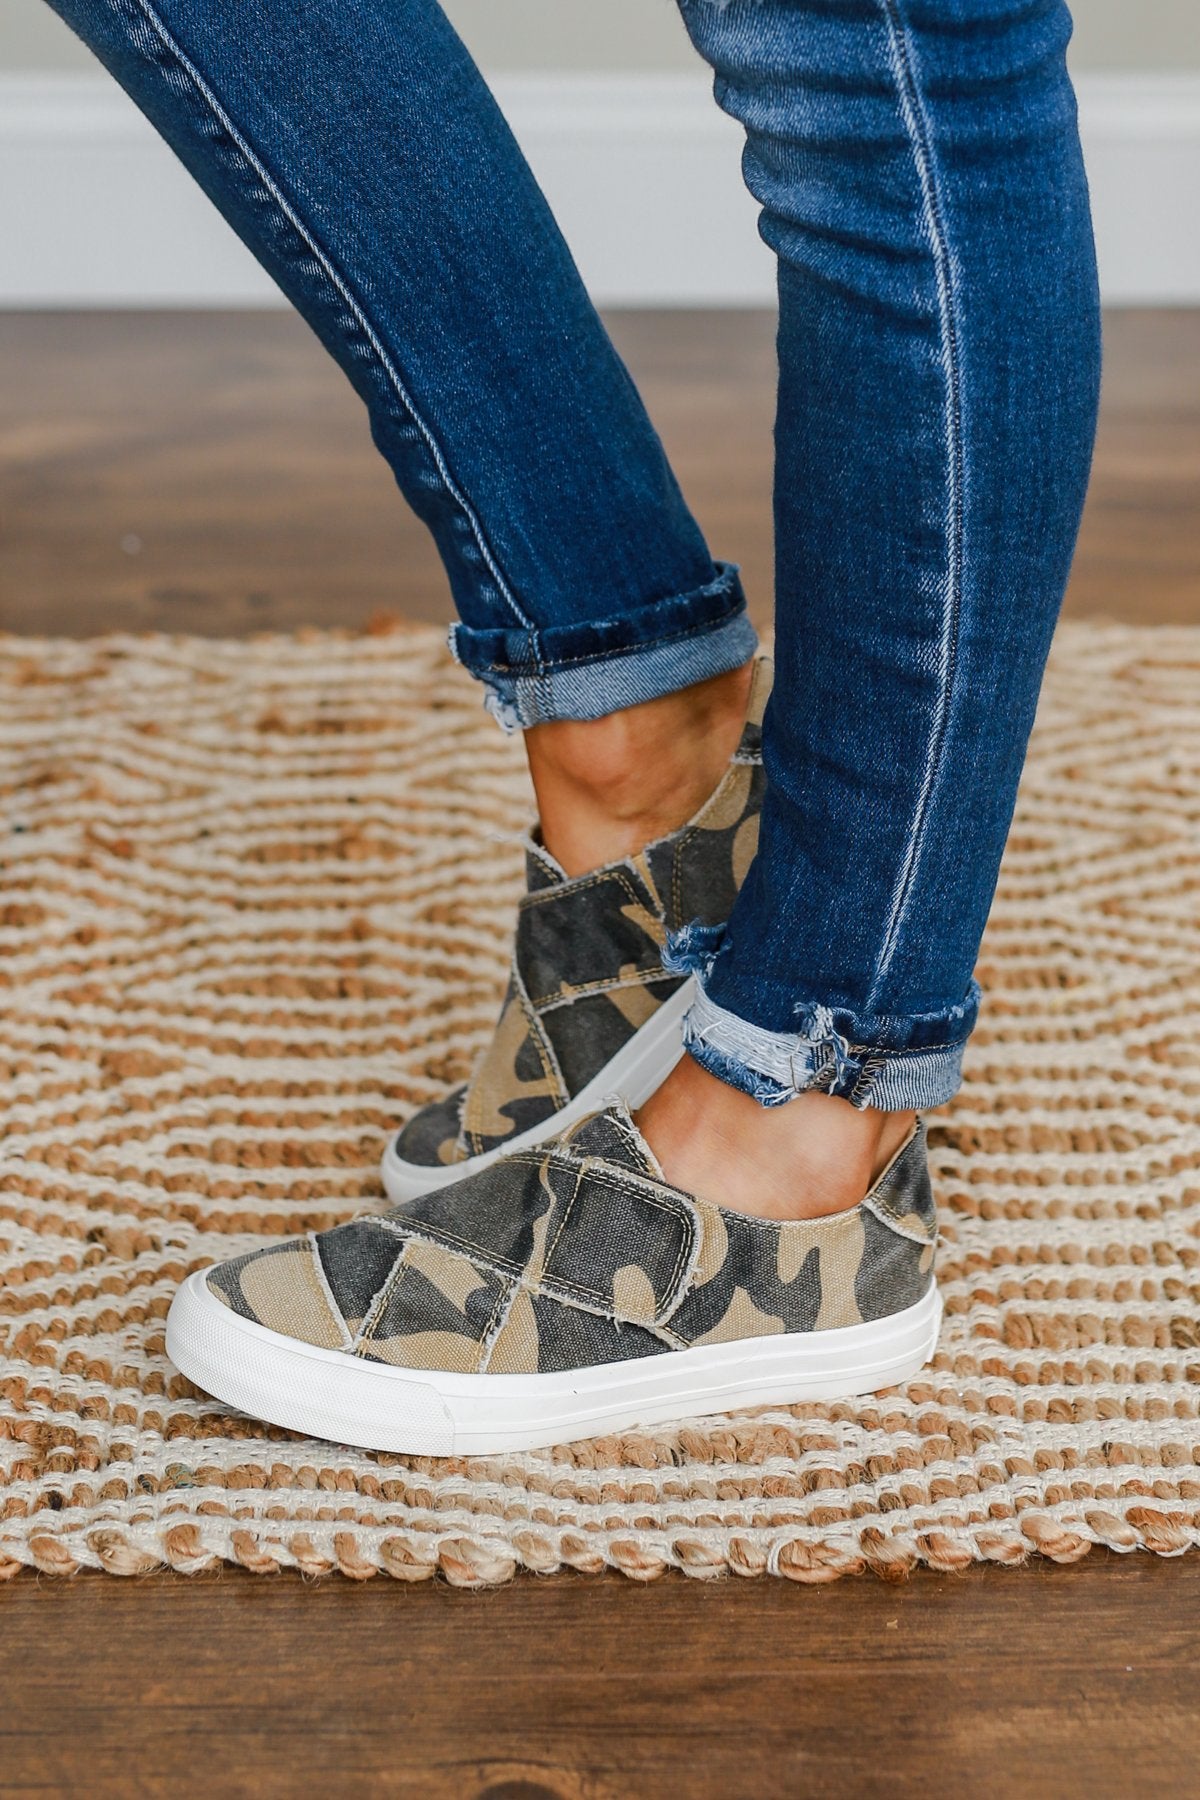 Gypsy Jazz Ivette Sneakers- Camo – The Pulse Boutique